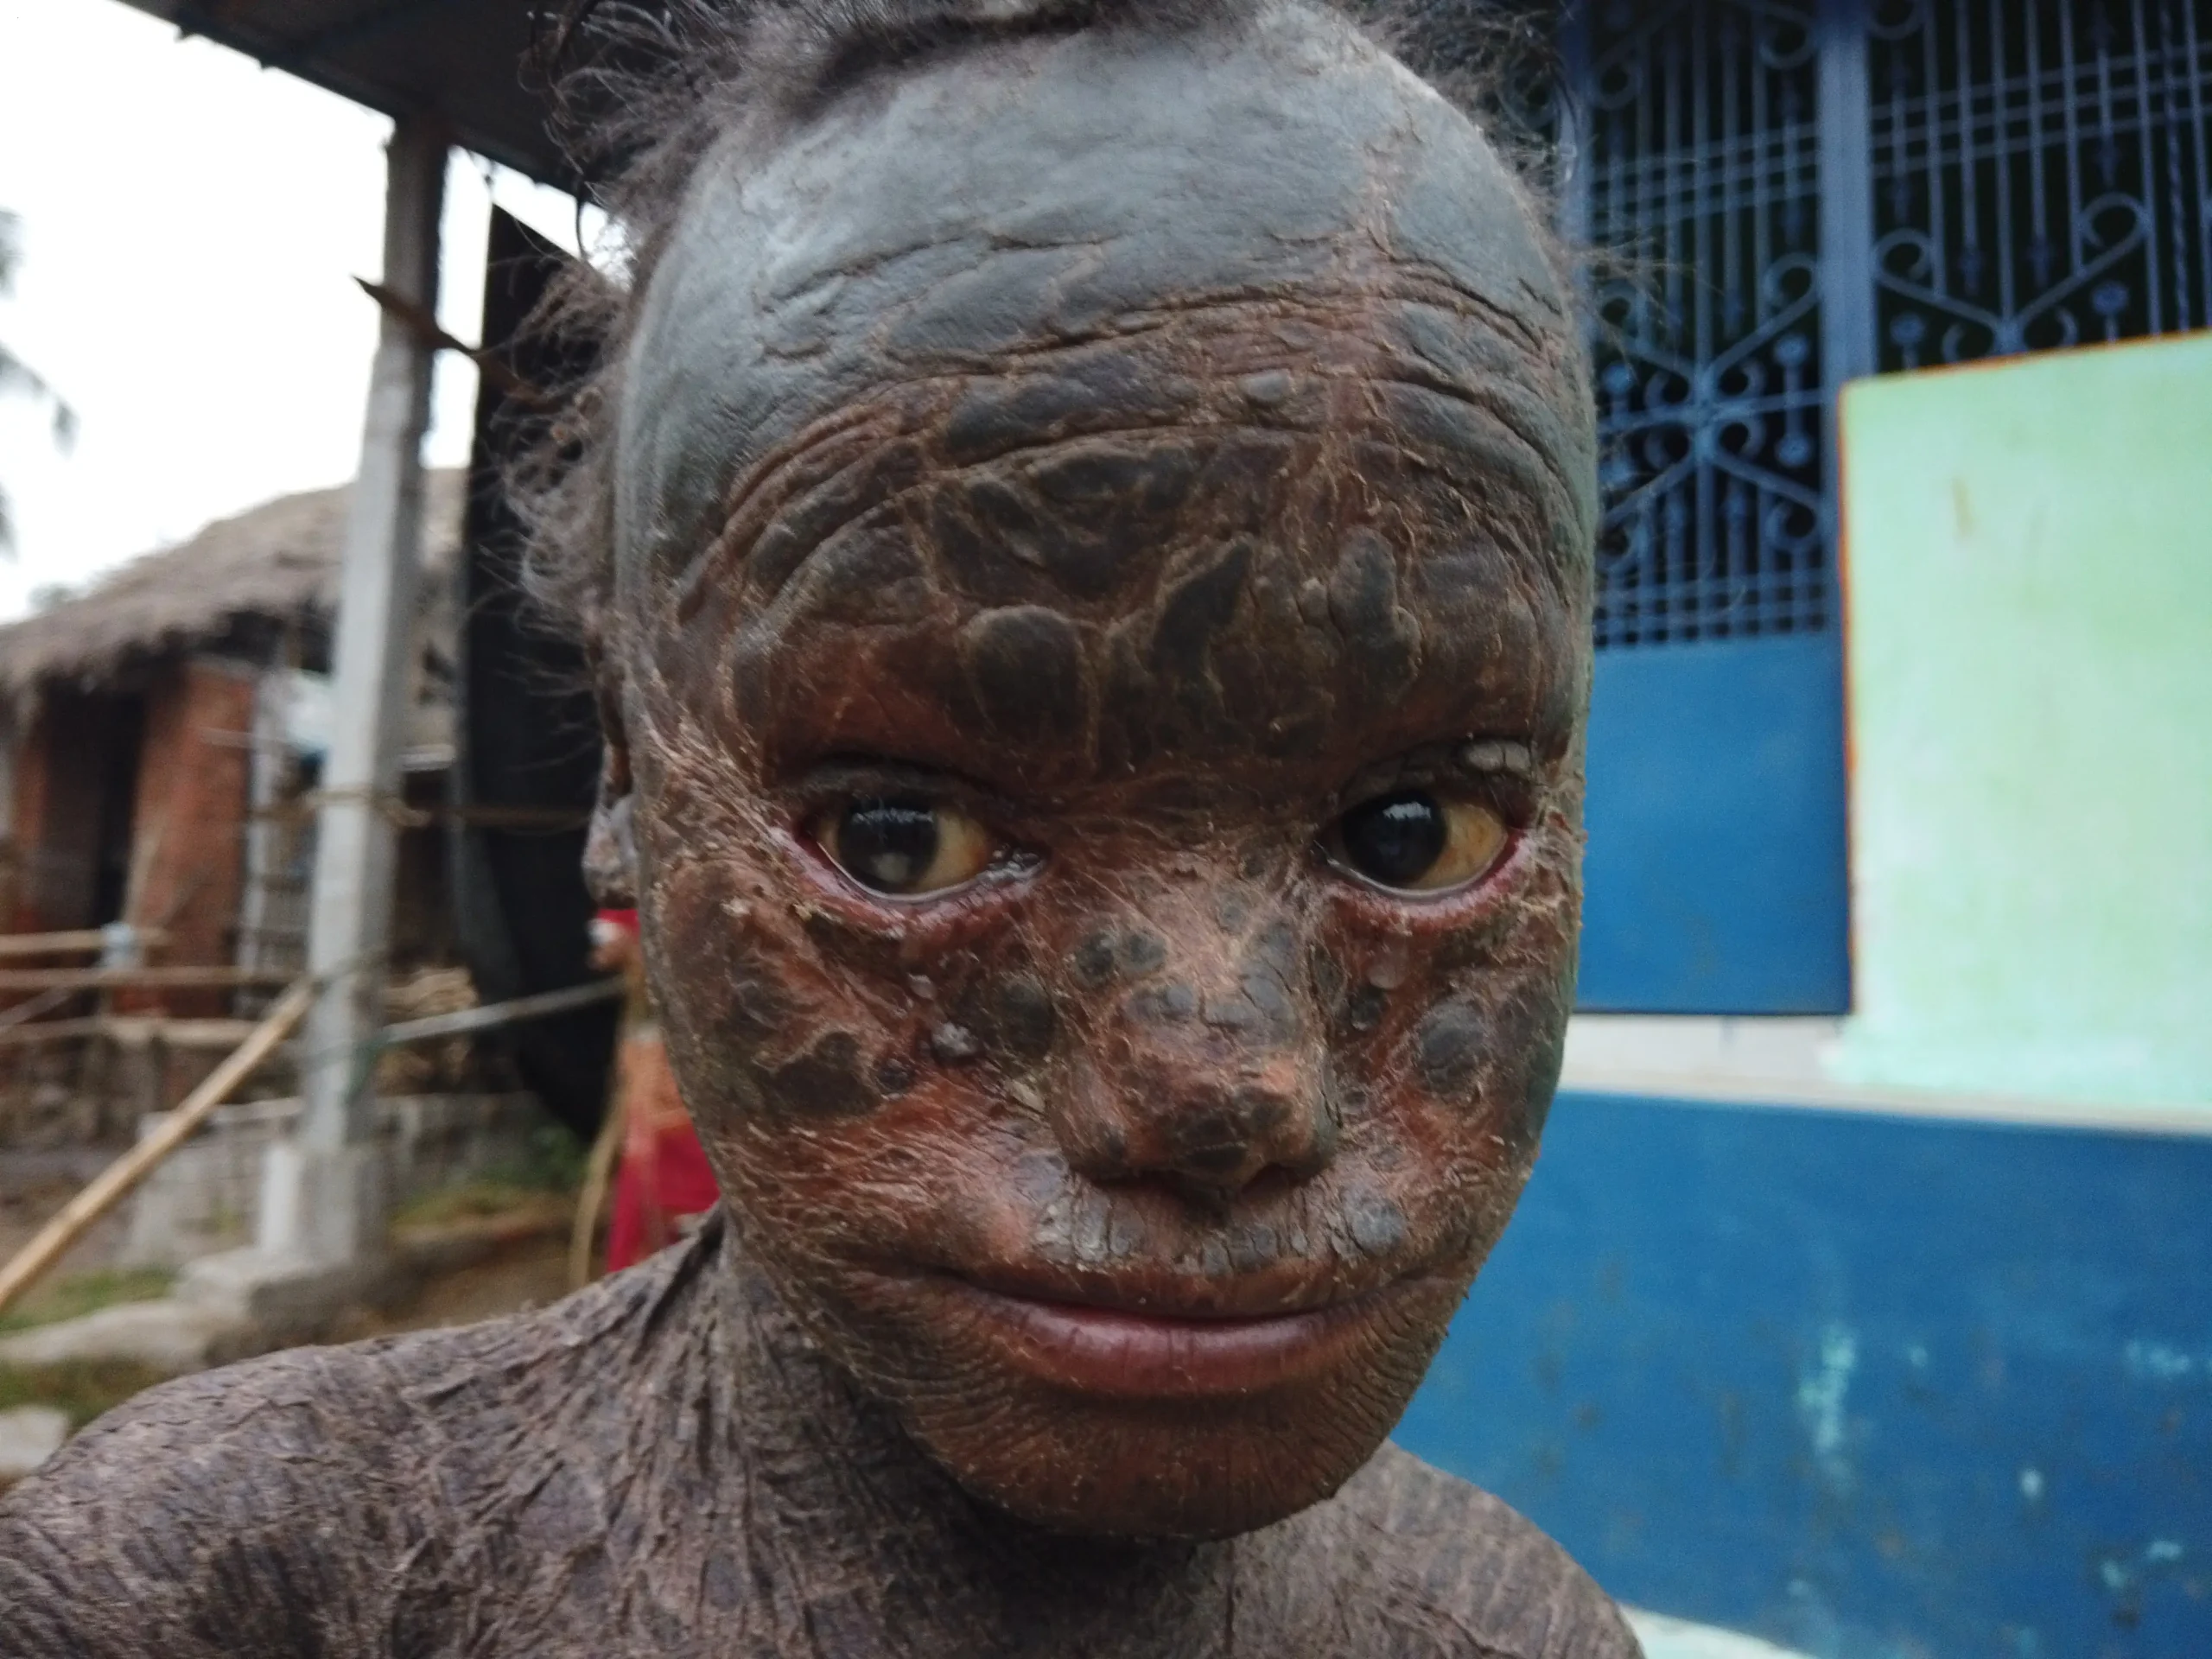 Revealing the ‘Speech Maven’: A 10-Year-Old with Unique Skin Since Birth